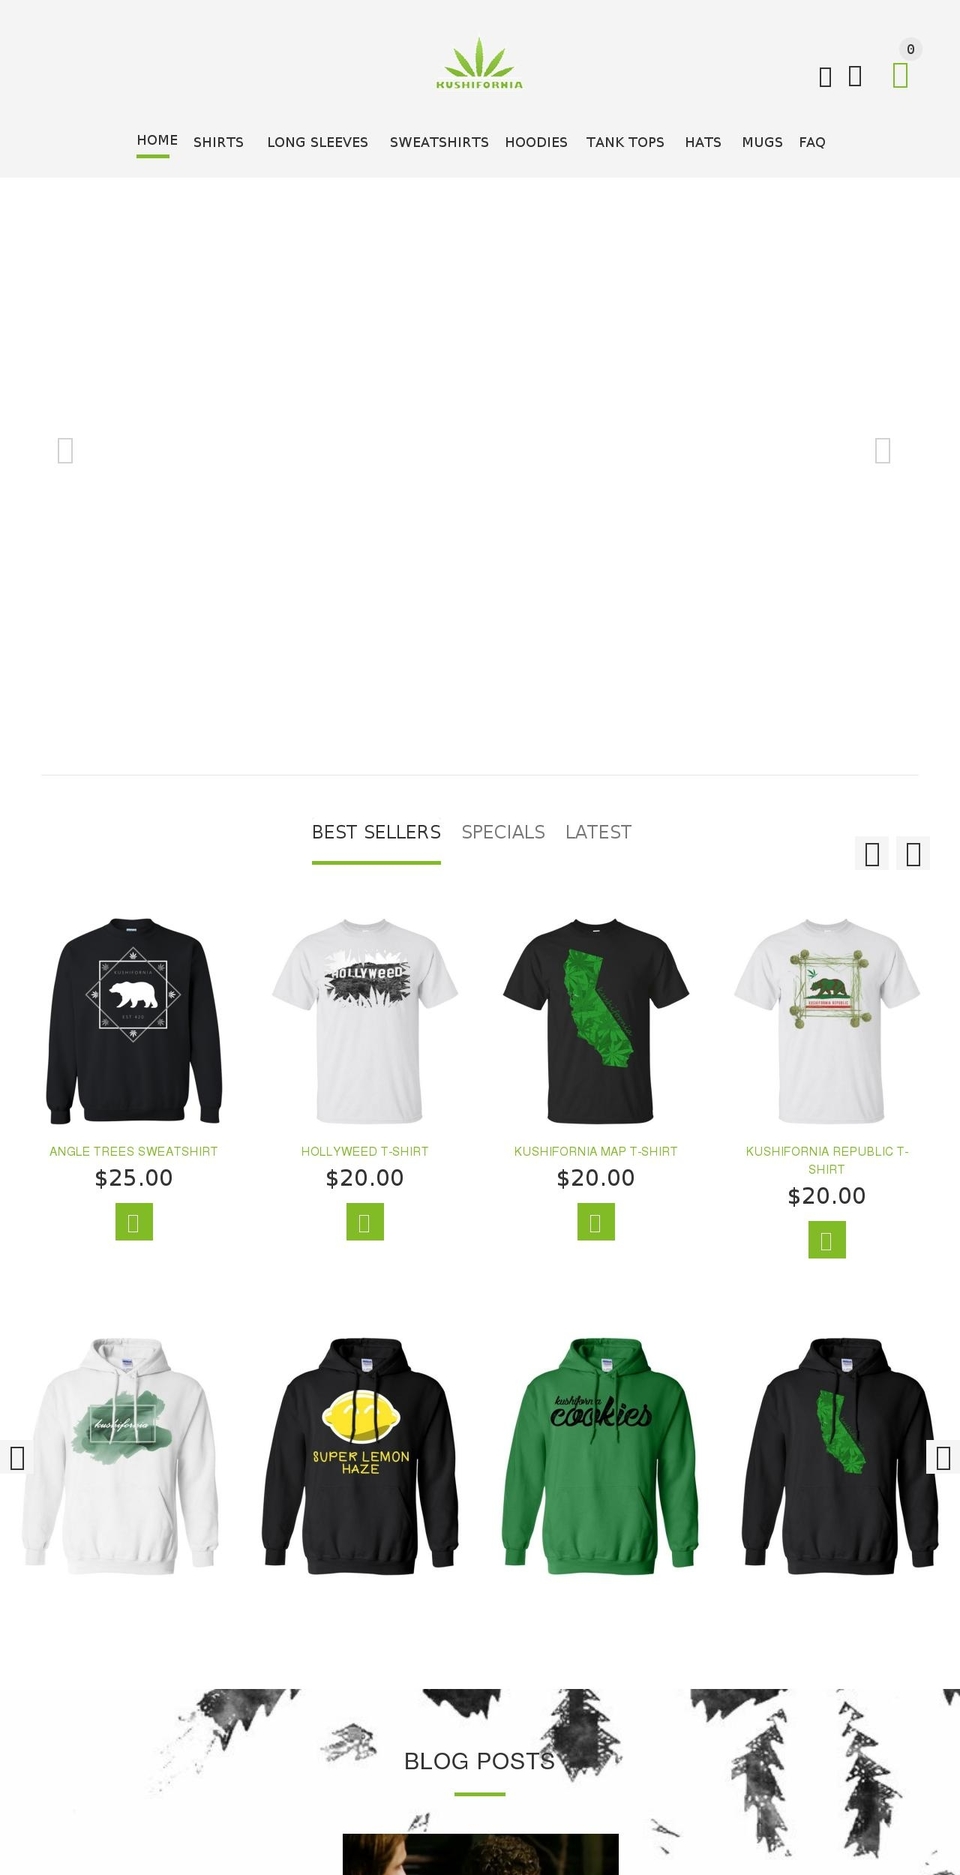 YourStore Shopify theme site example kushifornia.com